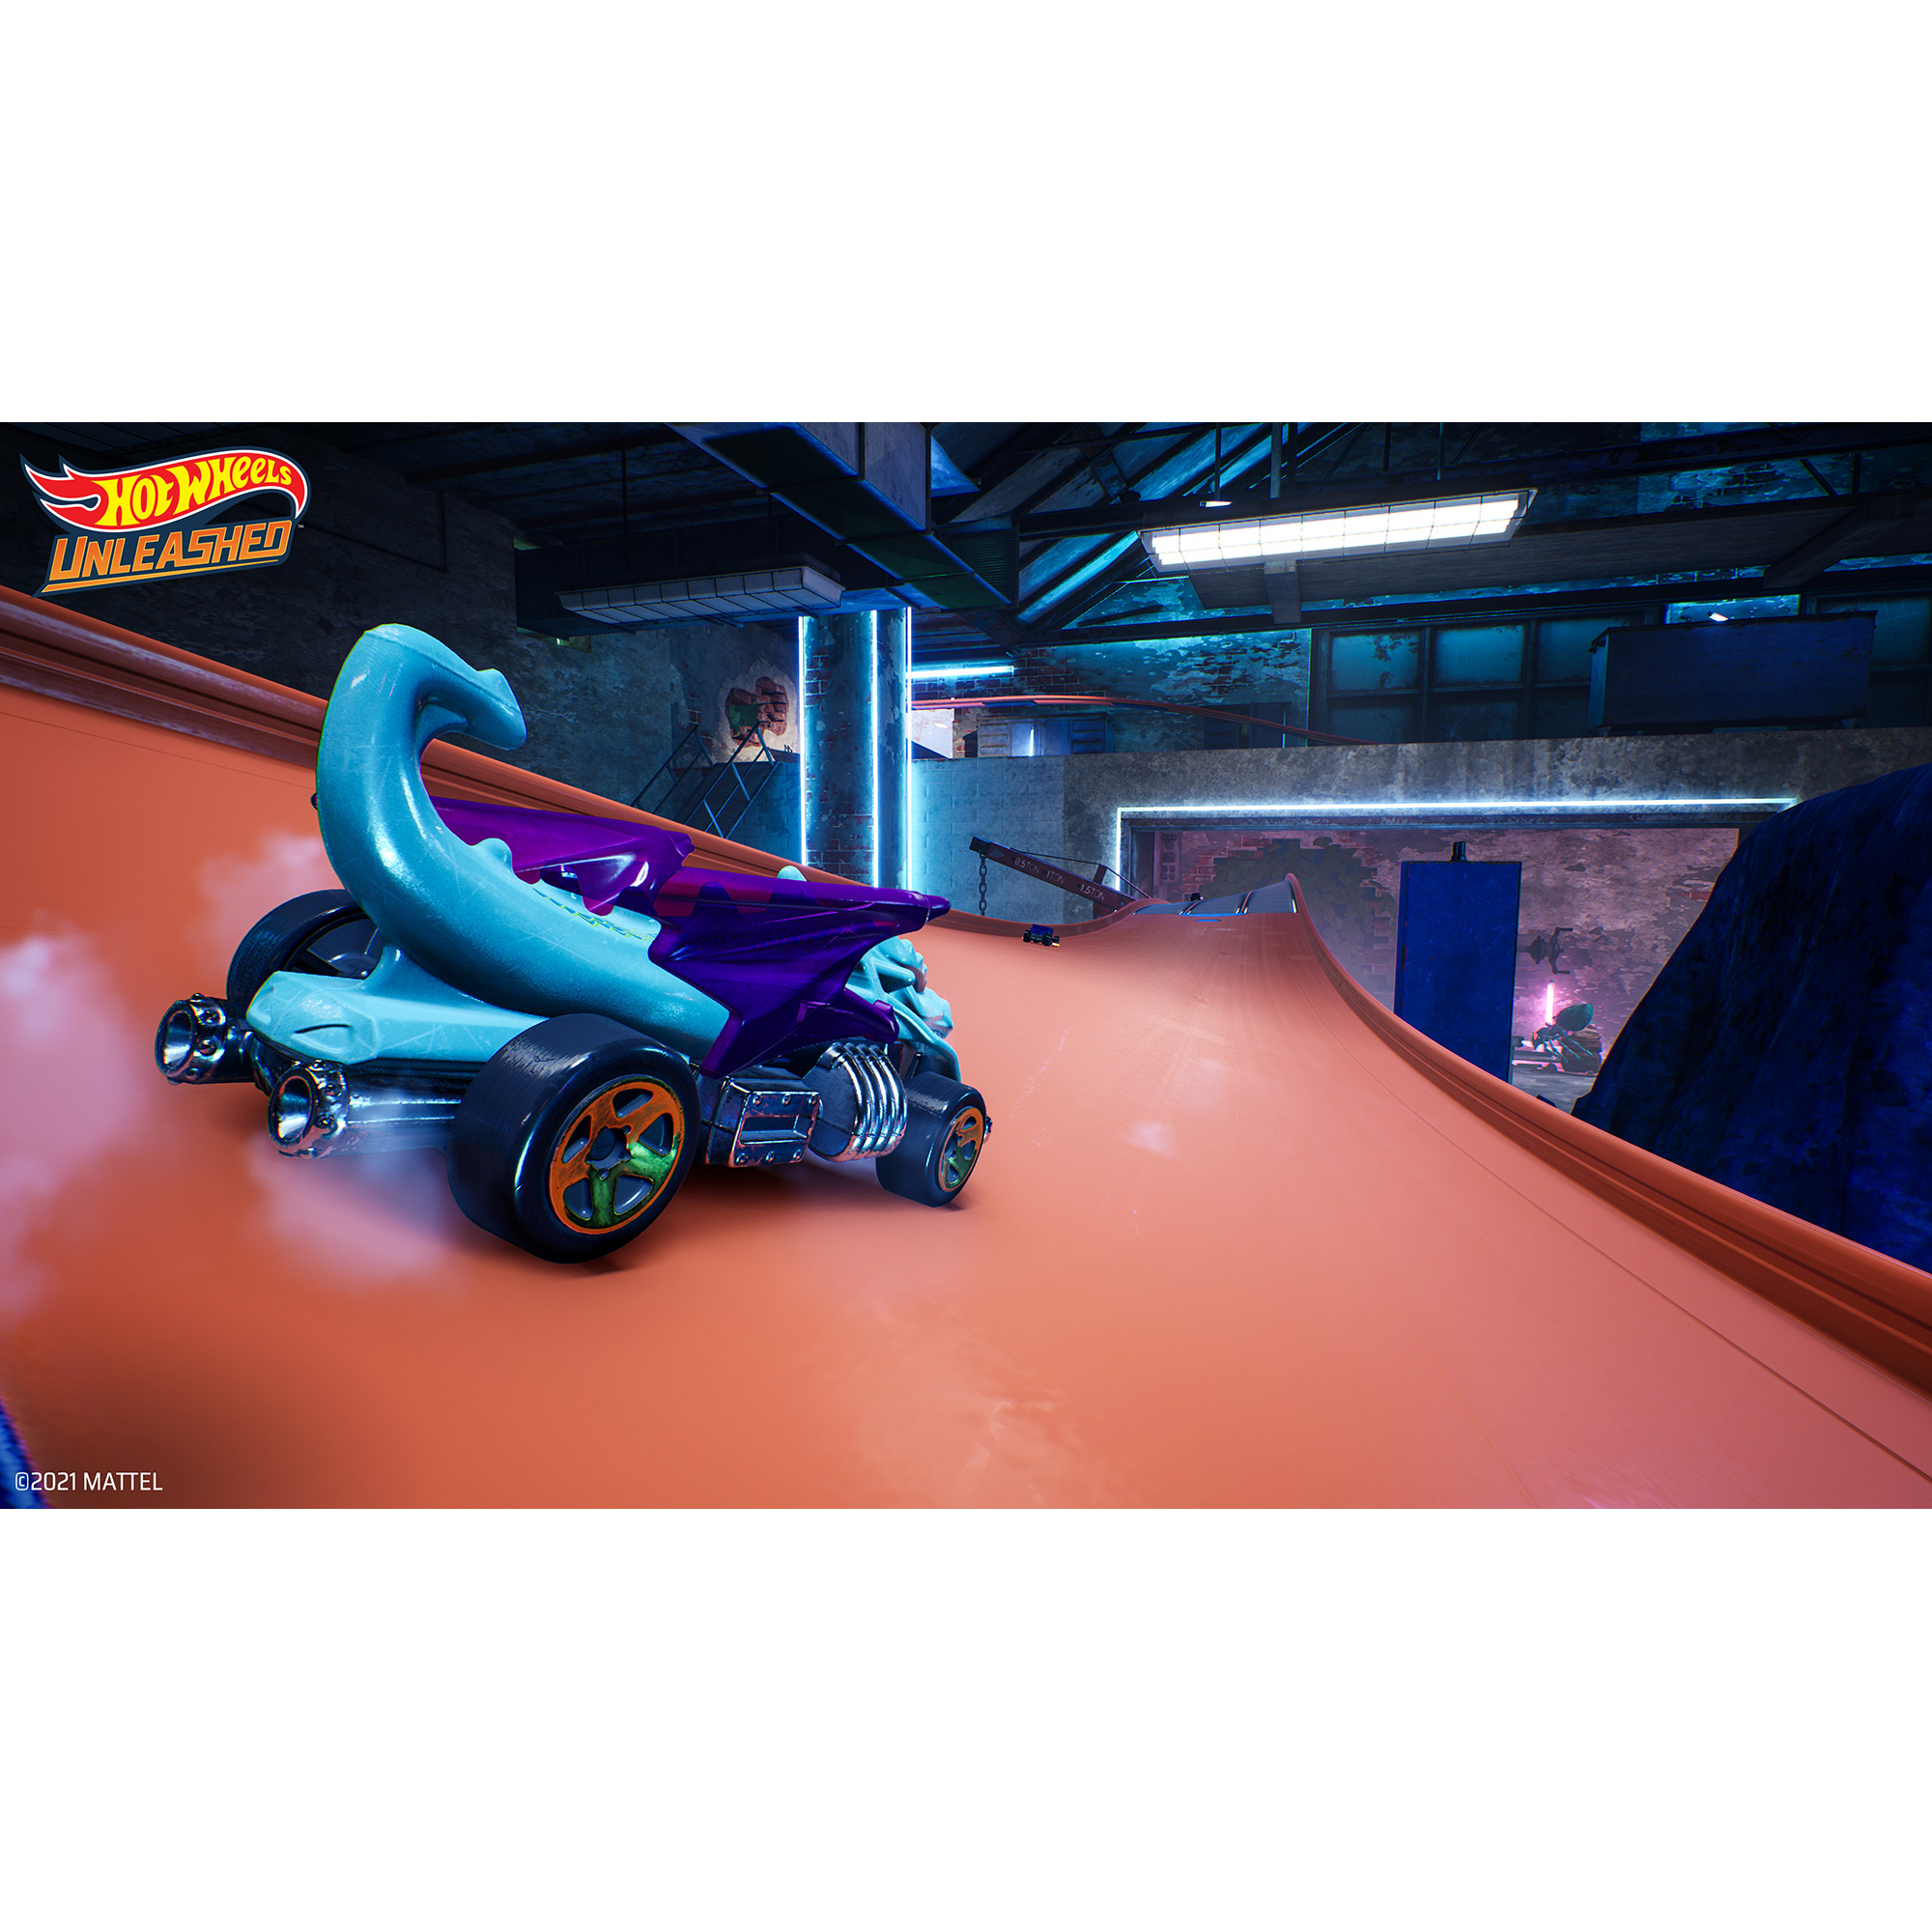 Walmart Exclusive: Hot Wheels Unleashed Challenge Accepted Edition, Koch Media, Nintendo Switch, [Physical], 816819019139 - image 3 of 16